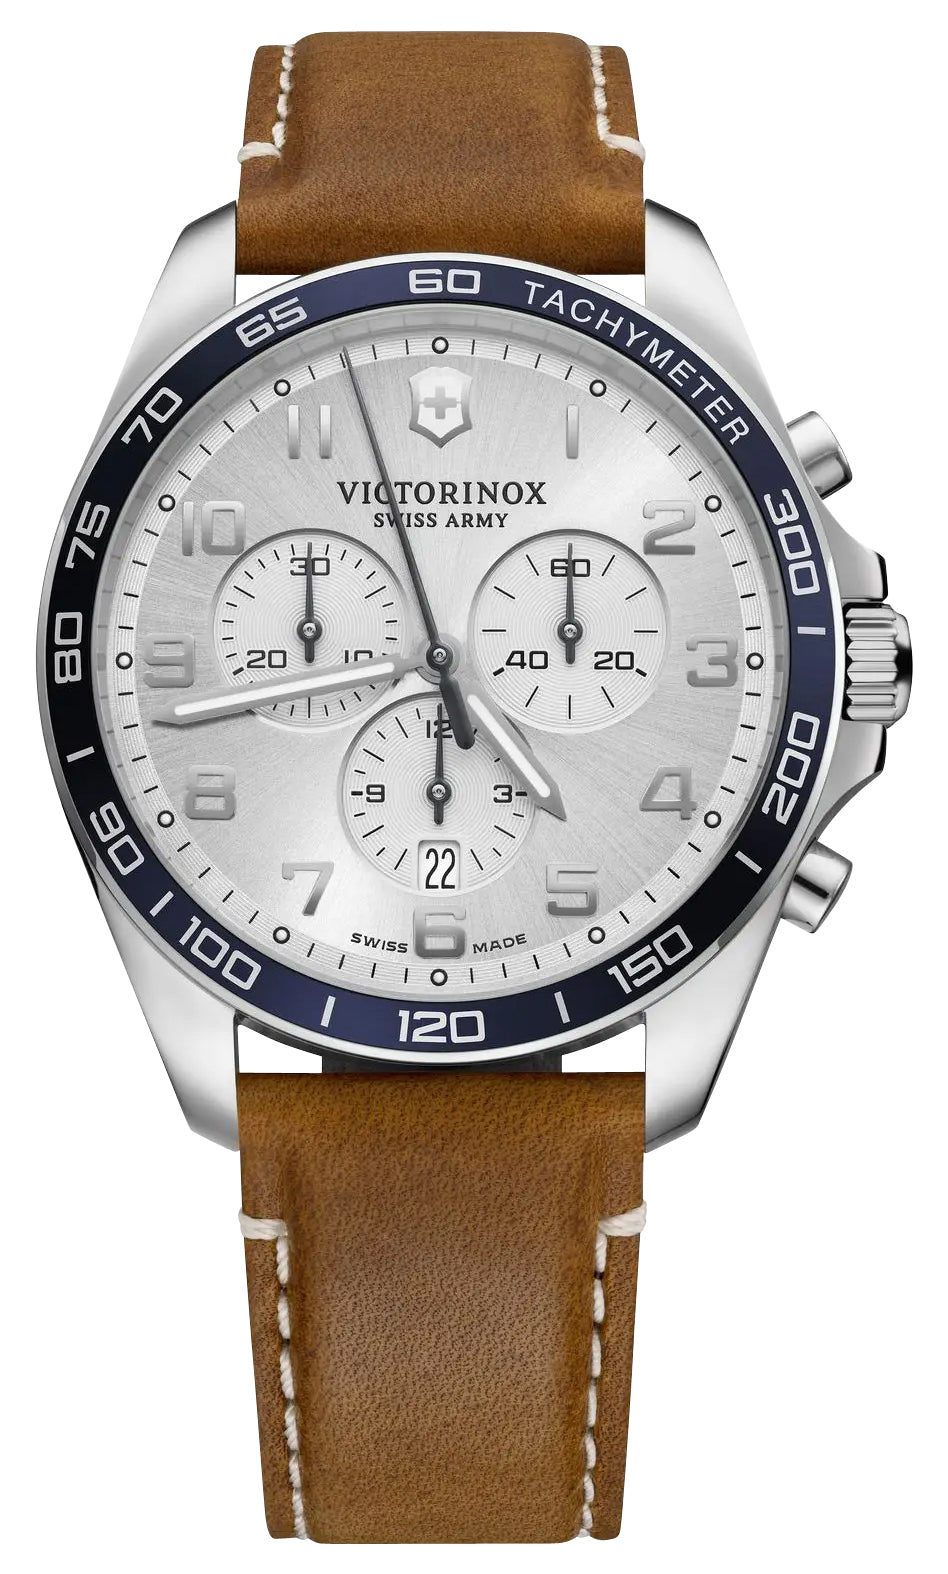 update alt-text with template Watches - Mens-Victorinox Swiss Army-241900-40 - 45 mm, chronograph, date, FieldForce, leather, mens, menswatches, new arrivals, round, rpSKU_241849, rpSKU_241851, rpSKU_241852, rpSKU_241855, rpSKU_241929, seconds sub-dial, silver-tone, stainless steel case, swiss quartz, Tachymeter, Victorinox Swiss Army, watches-Watches & Beyond